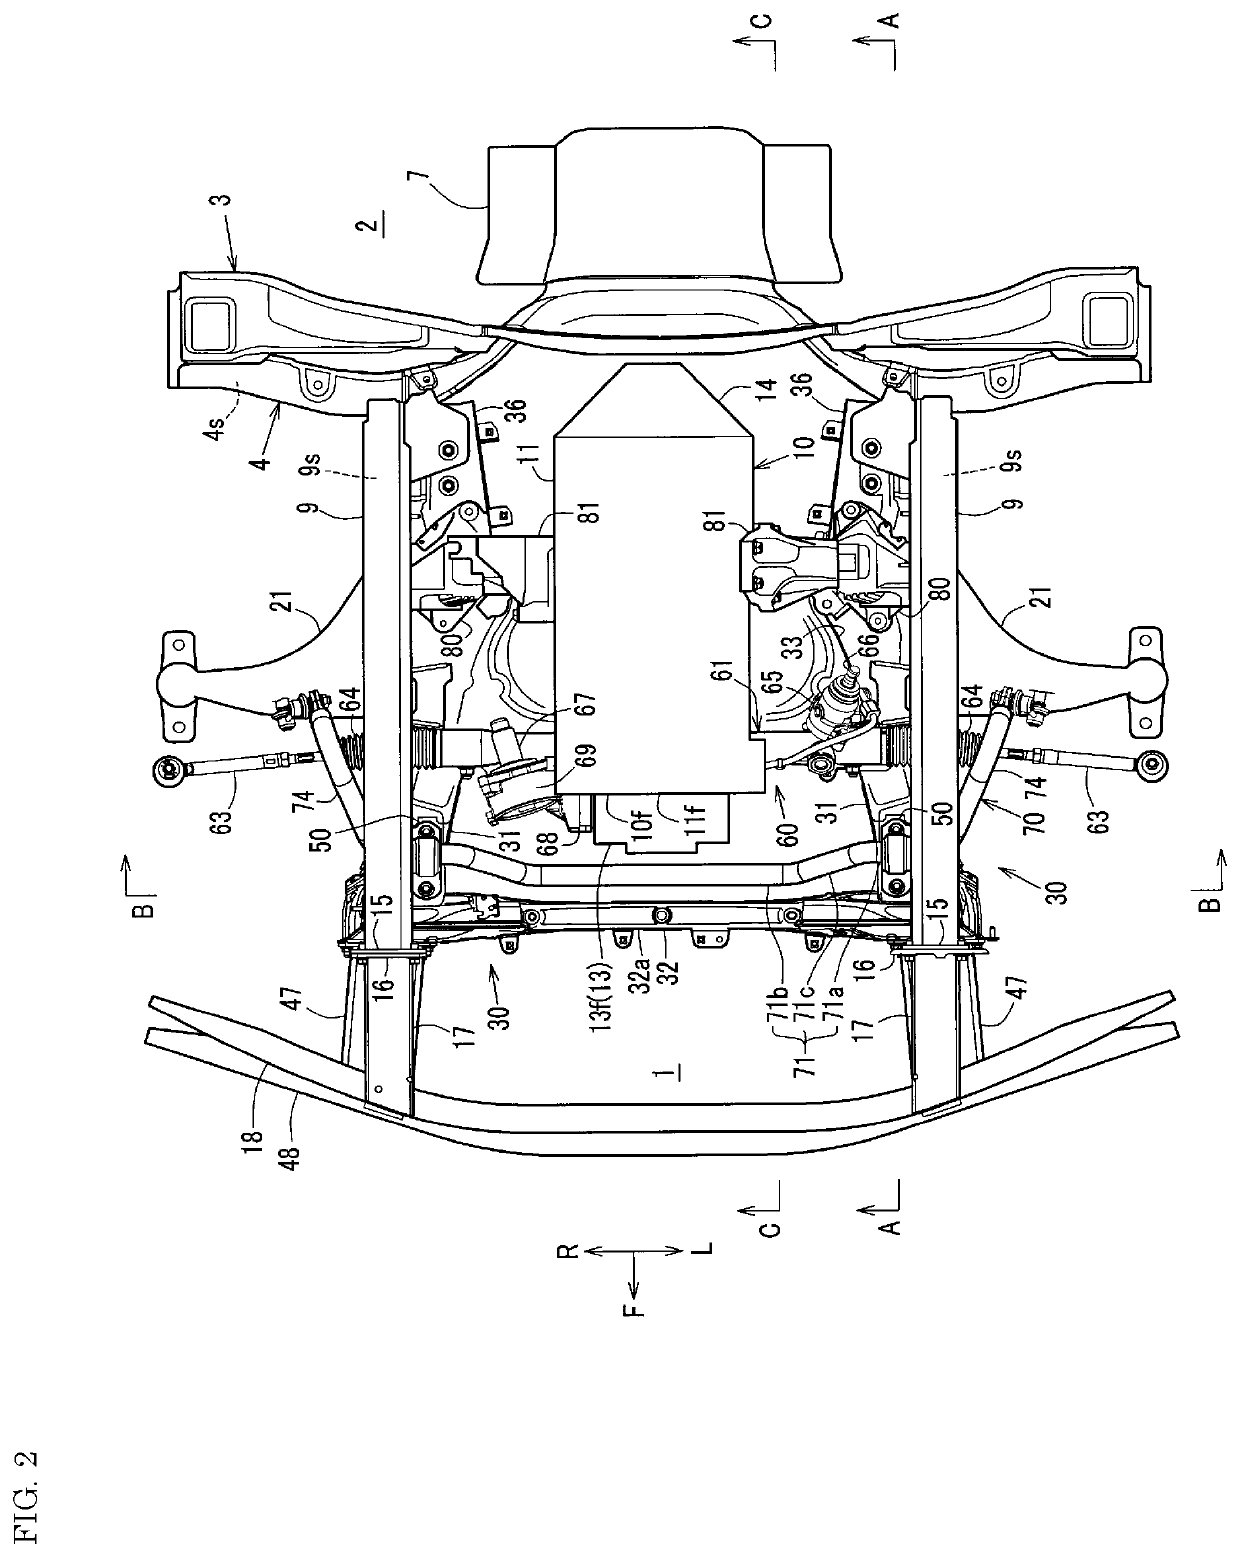 Subframe structure